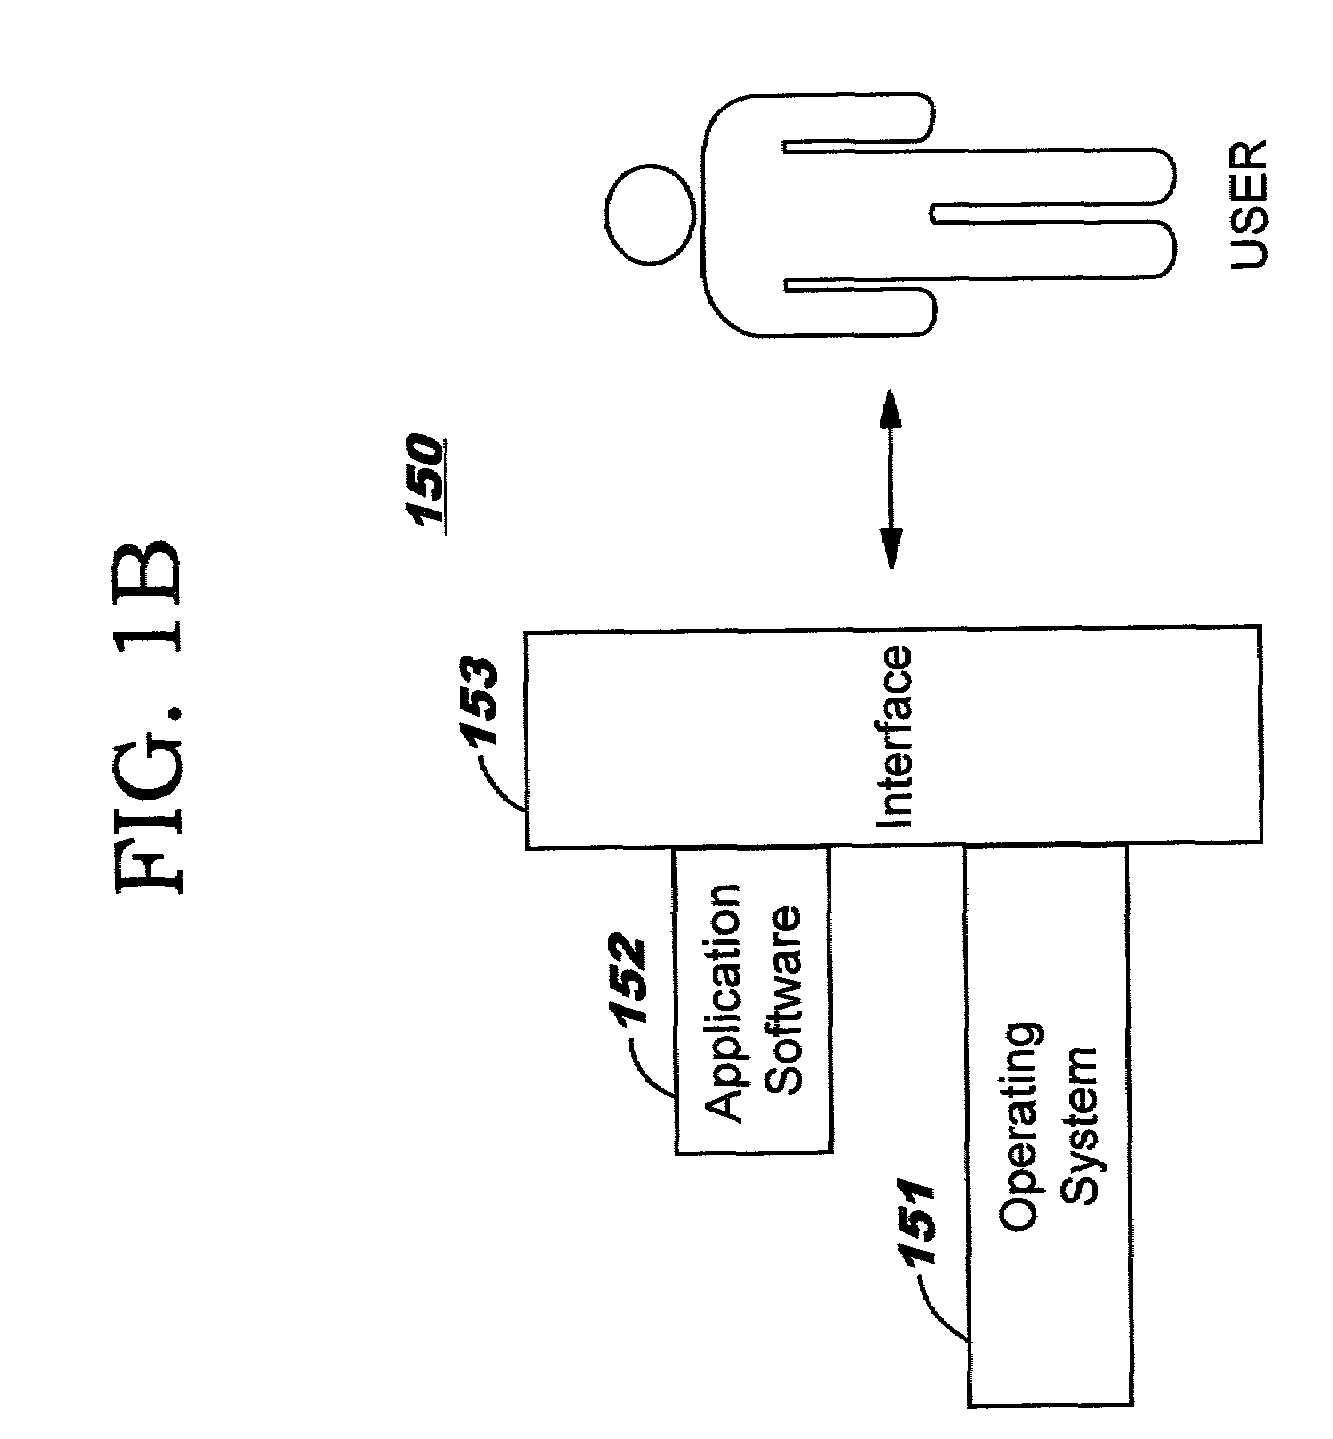 Method in an electronic spreadsheet for persistently self-replicating multiple ranges of cells through a copy-paste operation and a self-replication table